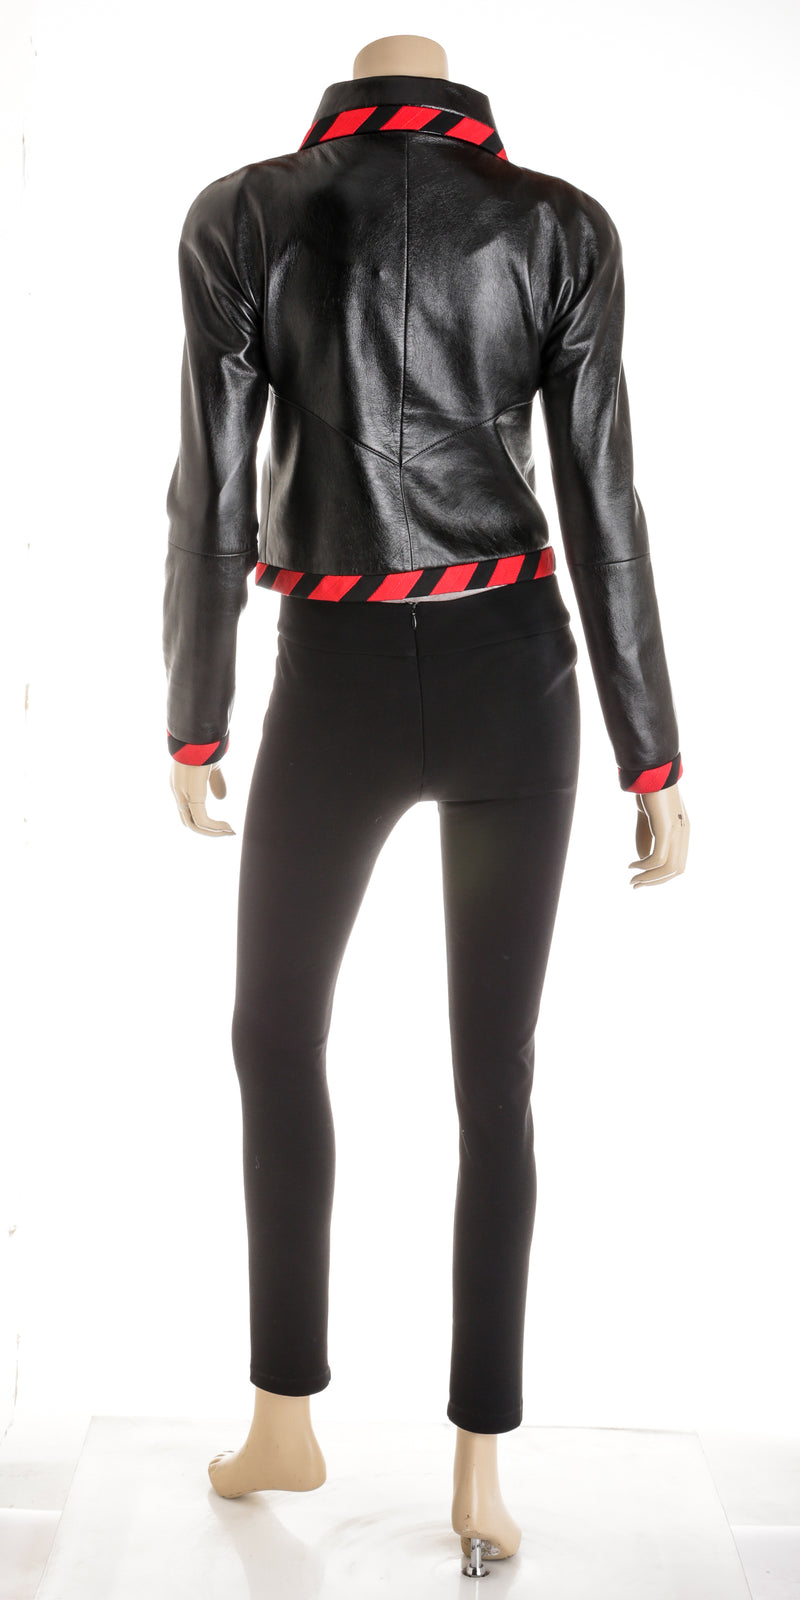 Chanel Black Leather Red Trim Motorcycle Jacket Size 36 Spring 2020 Collection